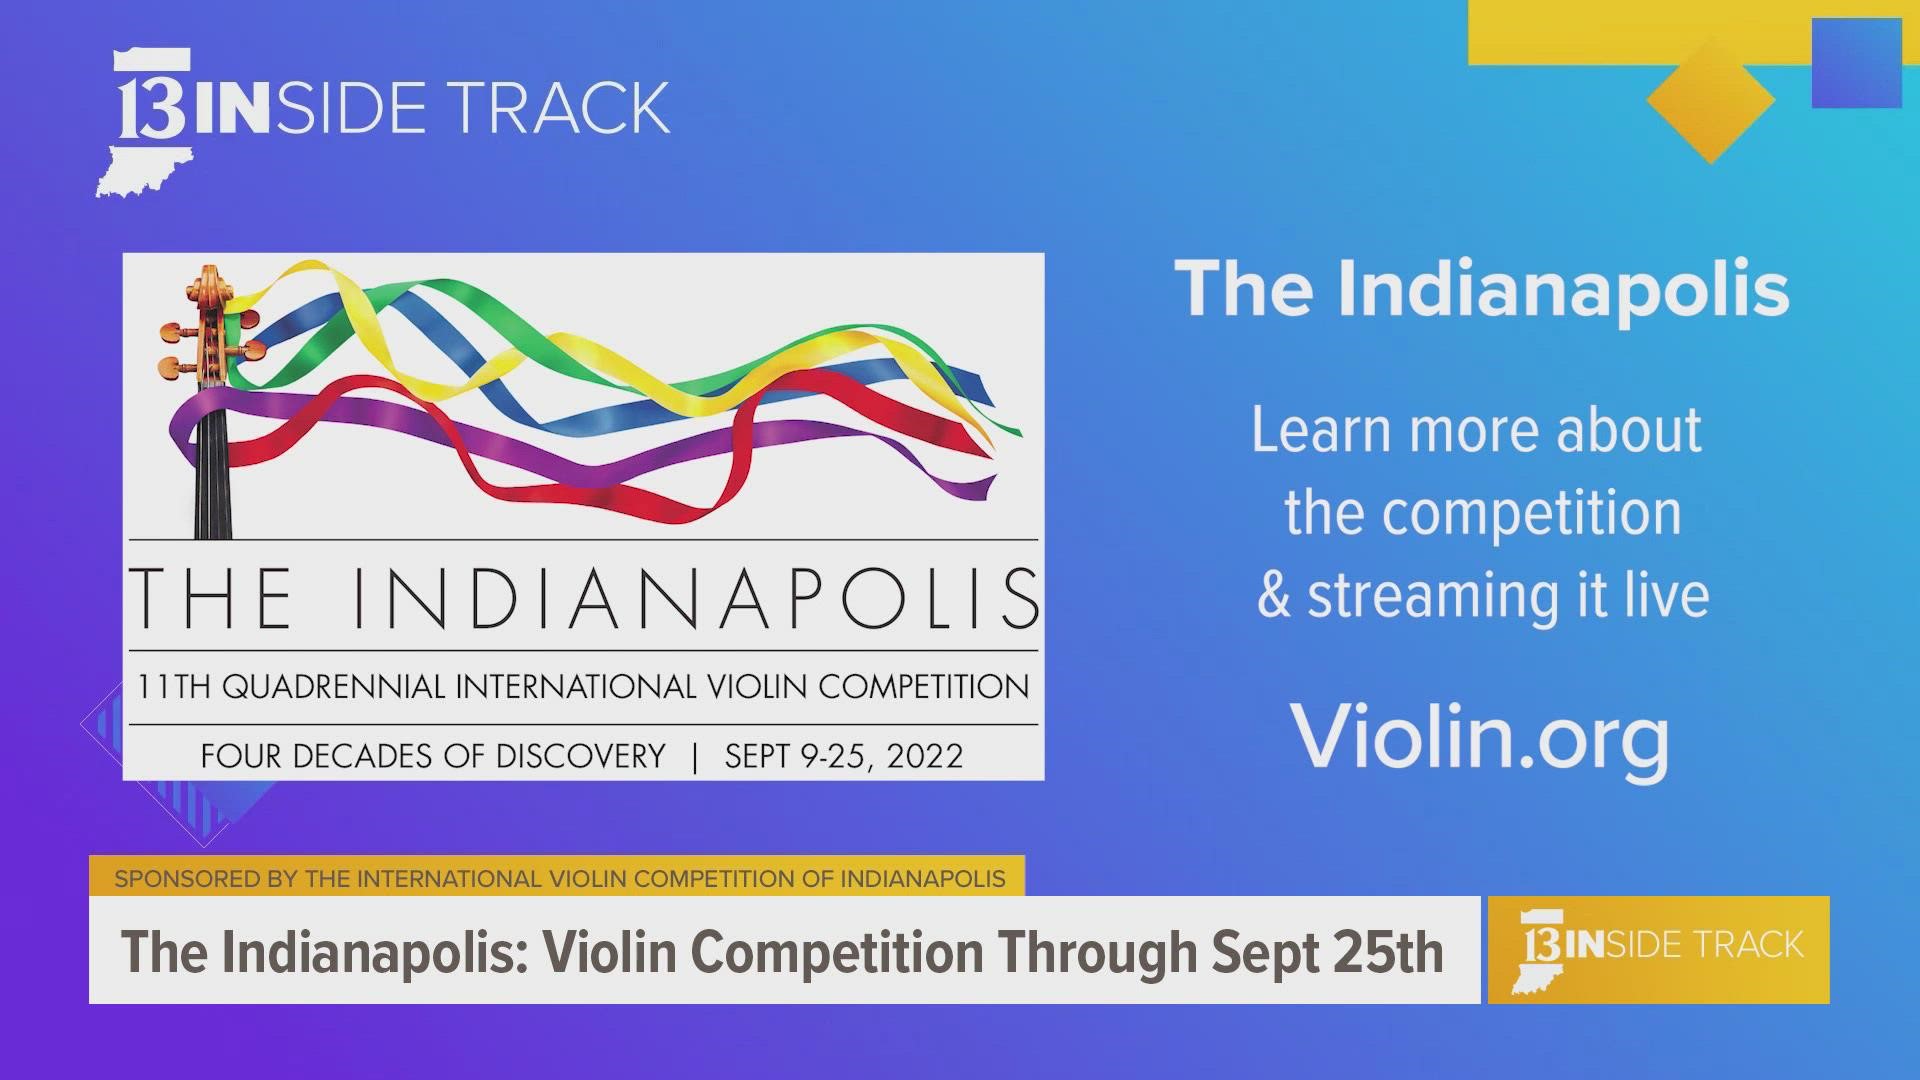 Learn how to experience this international violin competition that happens once every four years – from attending in person, to streaming the competition online.